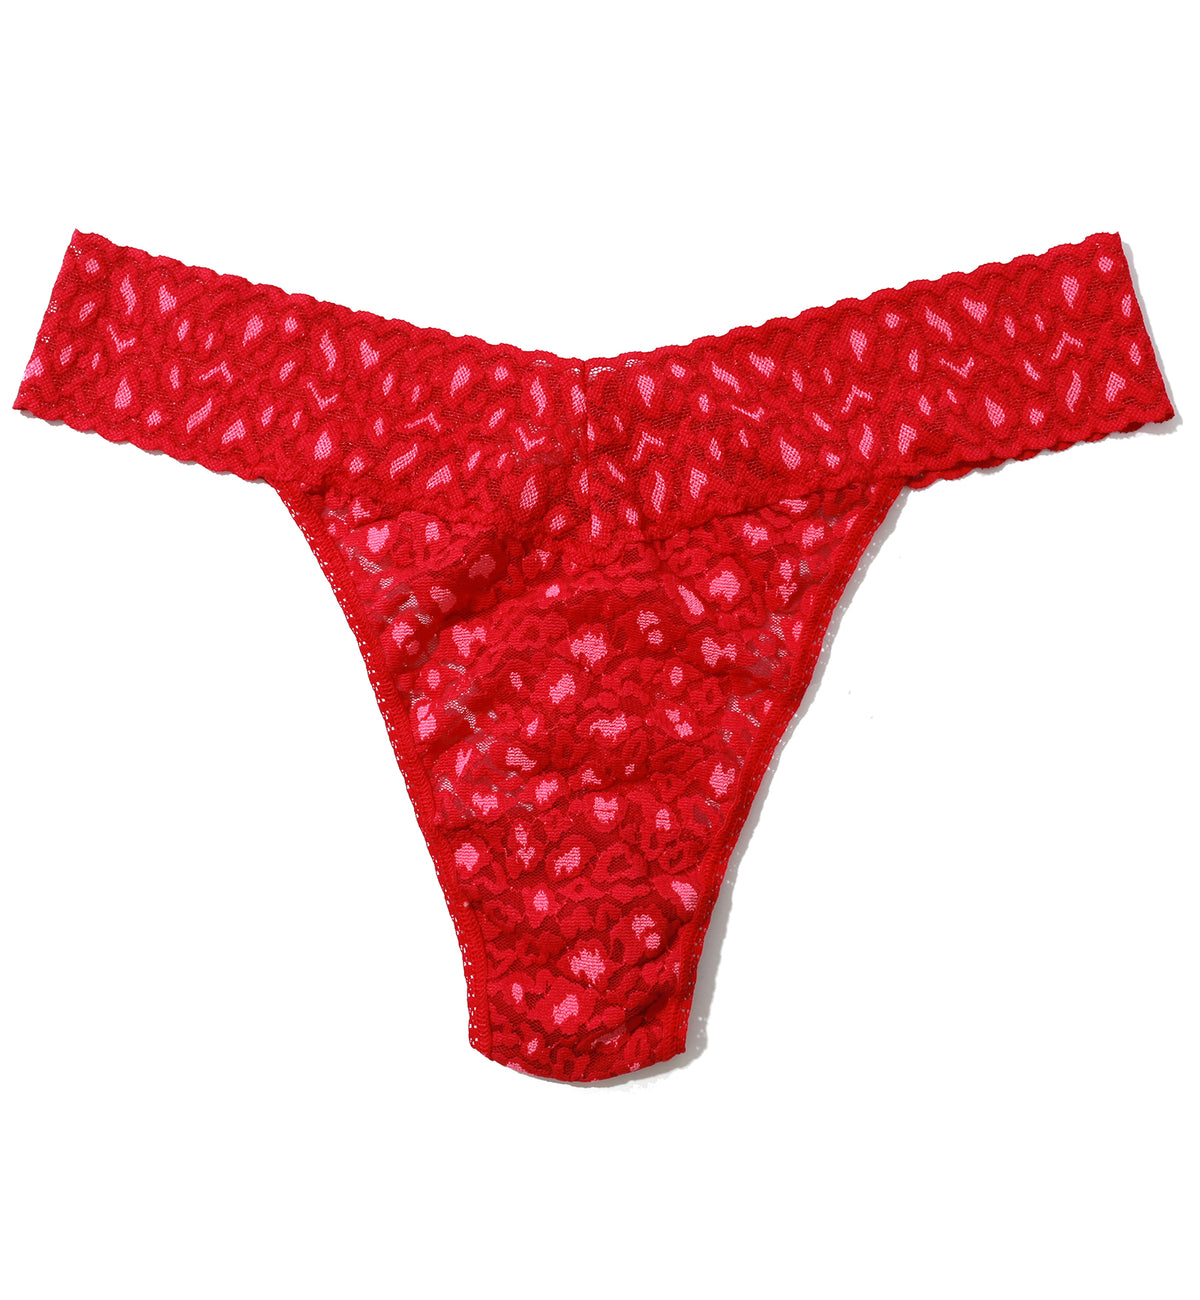 Hanky Panky Cross Dyed Leopard Original Rise Thong (7J1101P),Berry Sangria/Pink - Berry Sangria/Pink,One Size